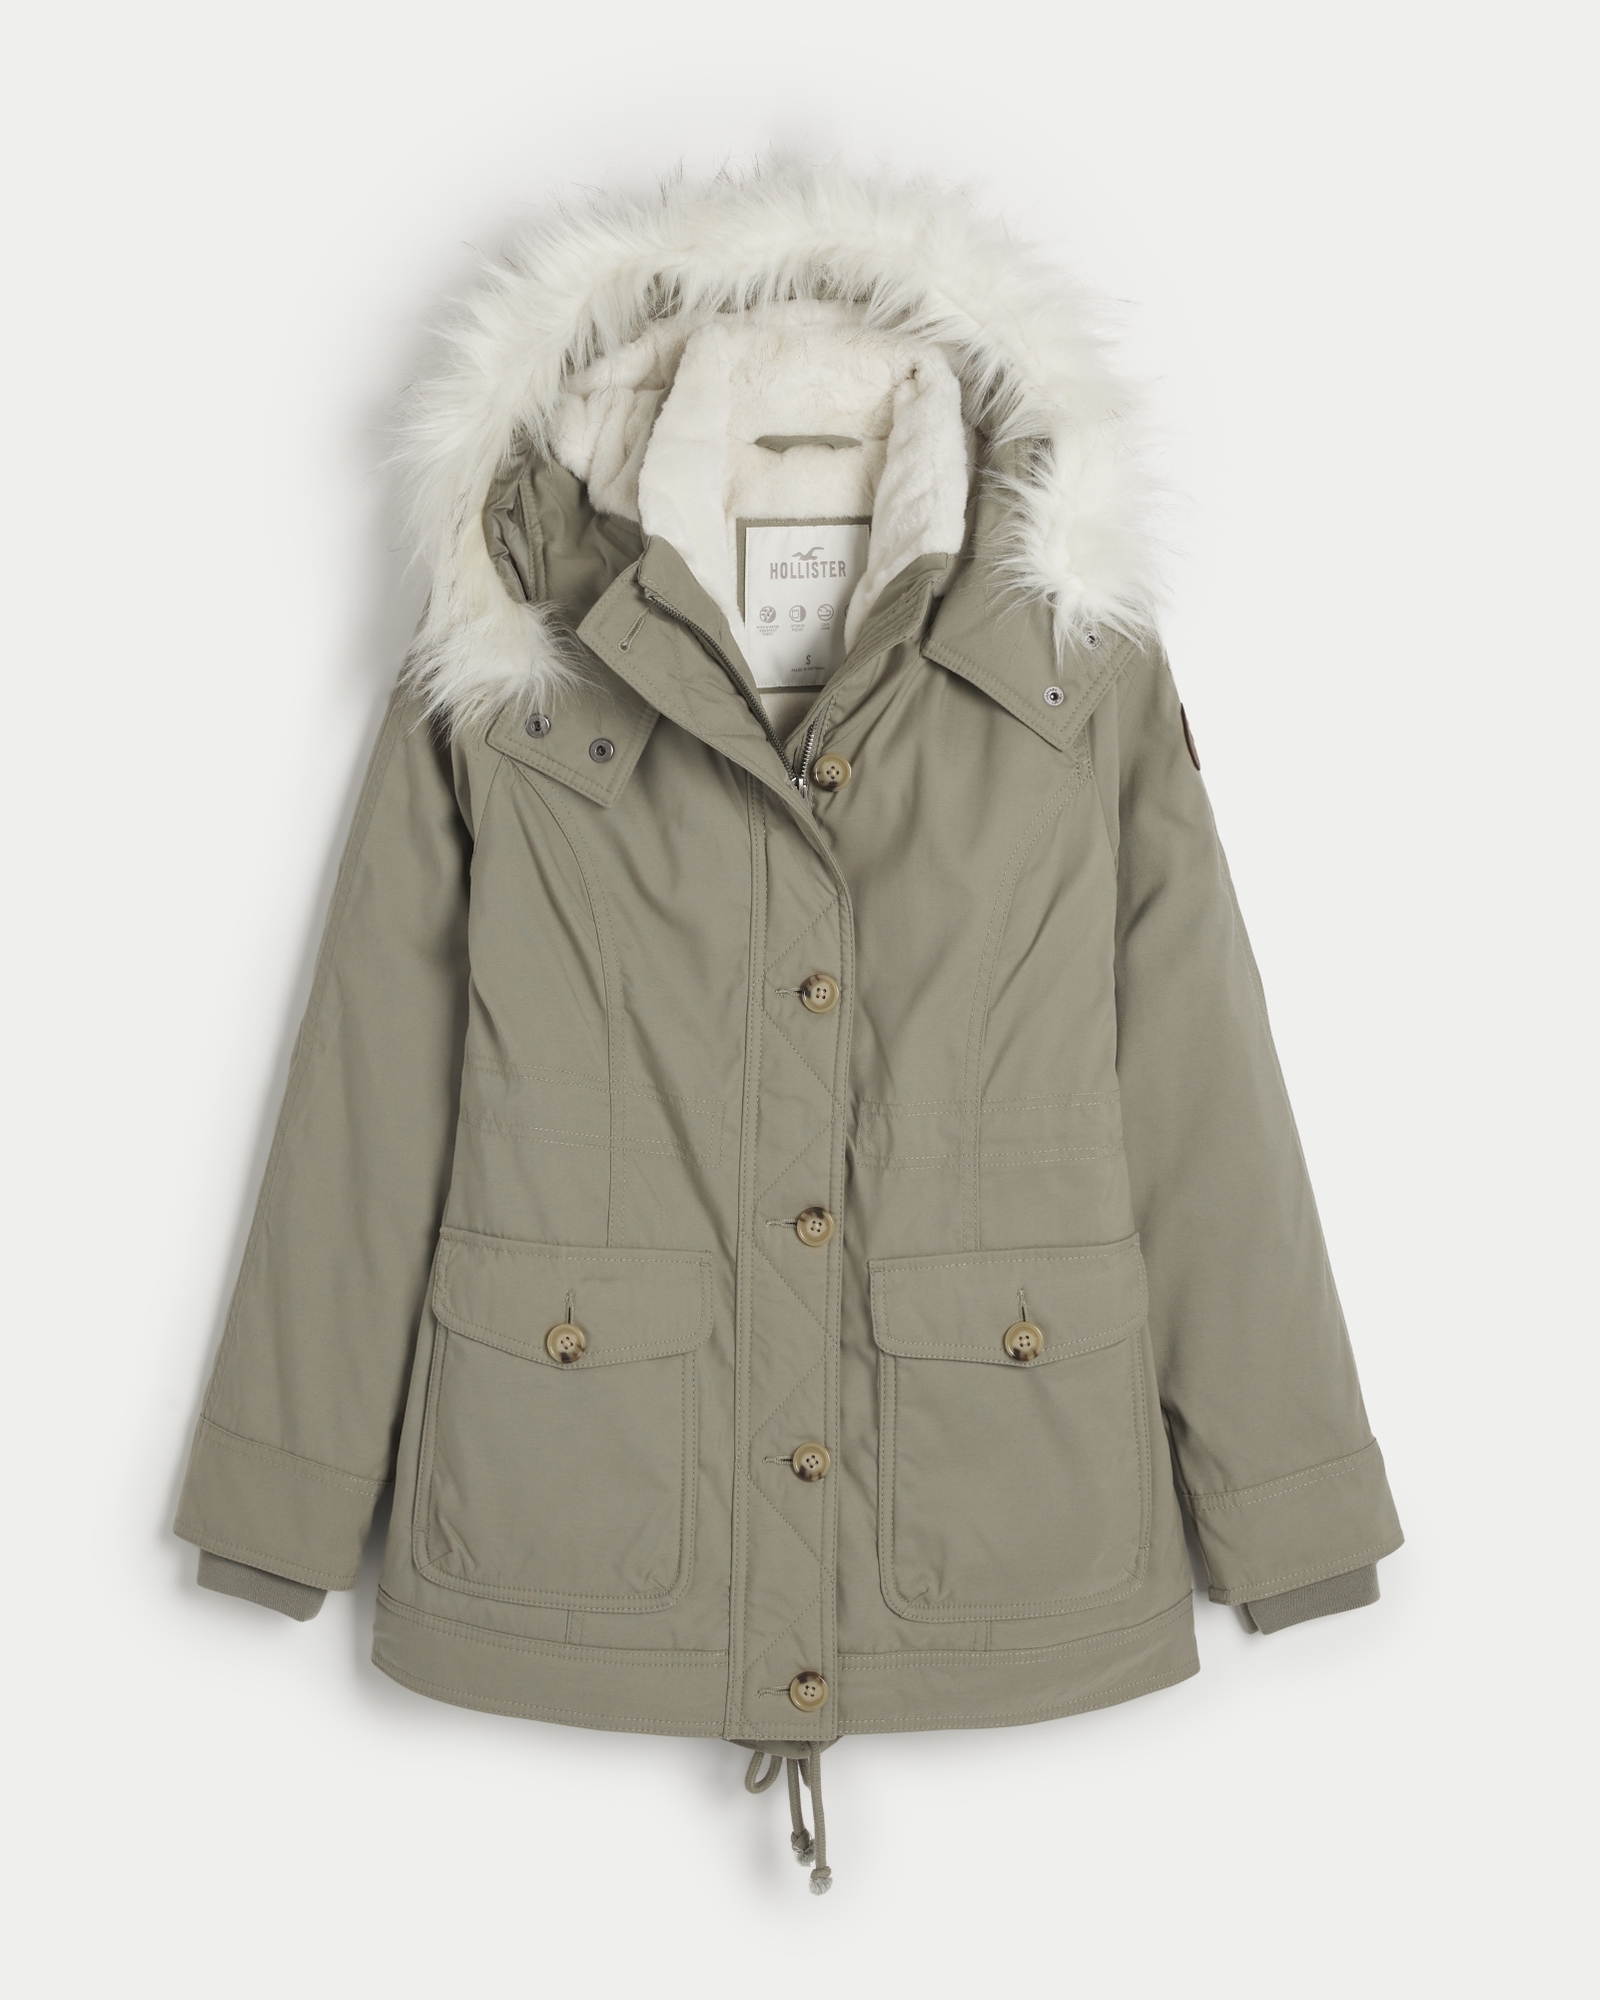 NWT Hollister by Abercrombie&Fitch Cozy-Lined Parka Faux Fur Coat Jacket  Olive